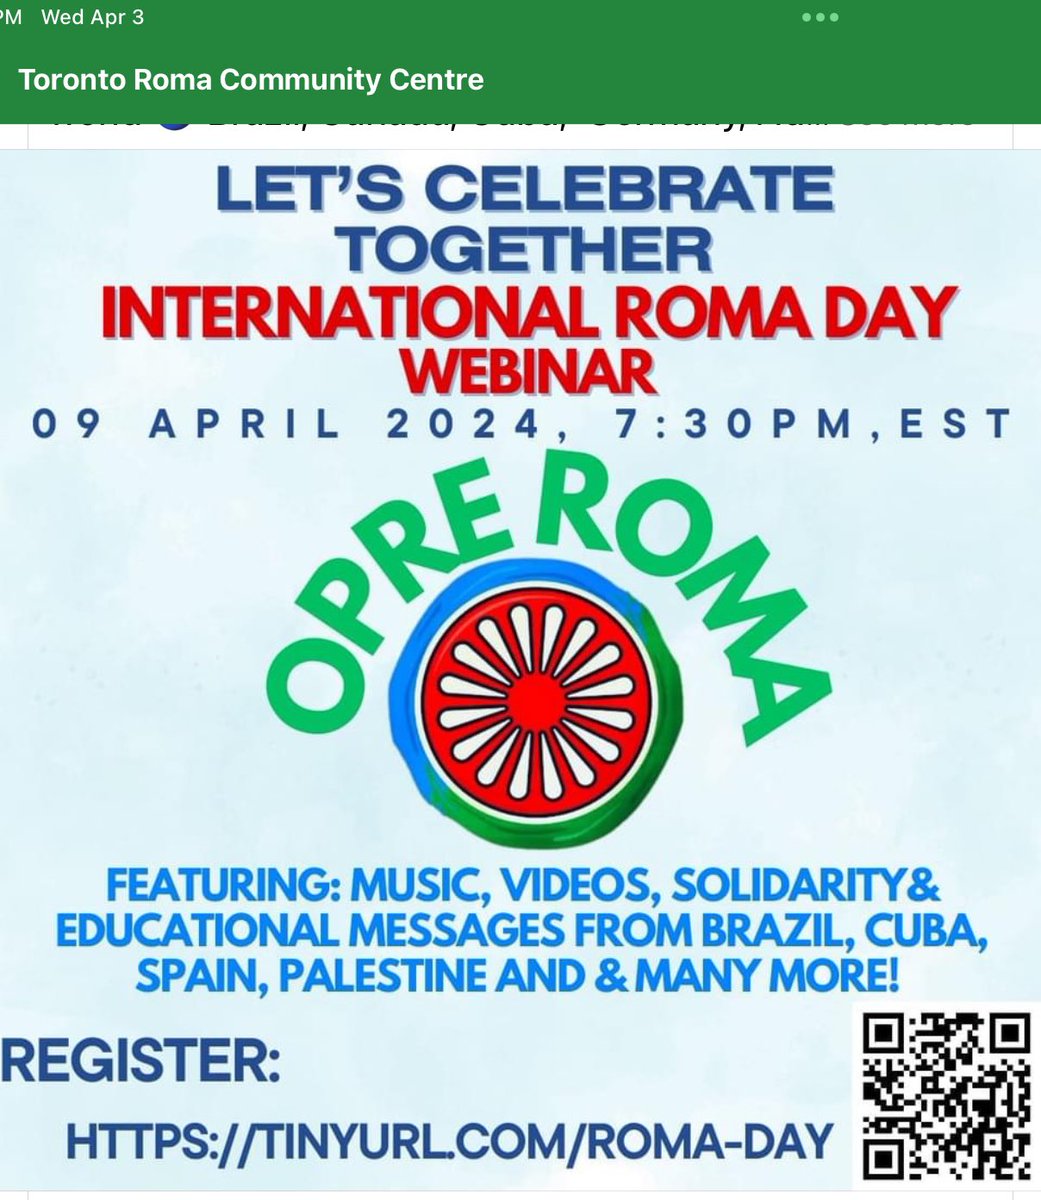 For #InternationalRomaDay April 9th, please join the webinar hosted by the Toronto #Roma Community Centre. #OpreRoma.